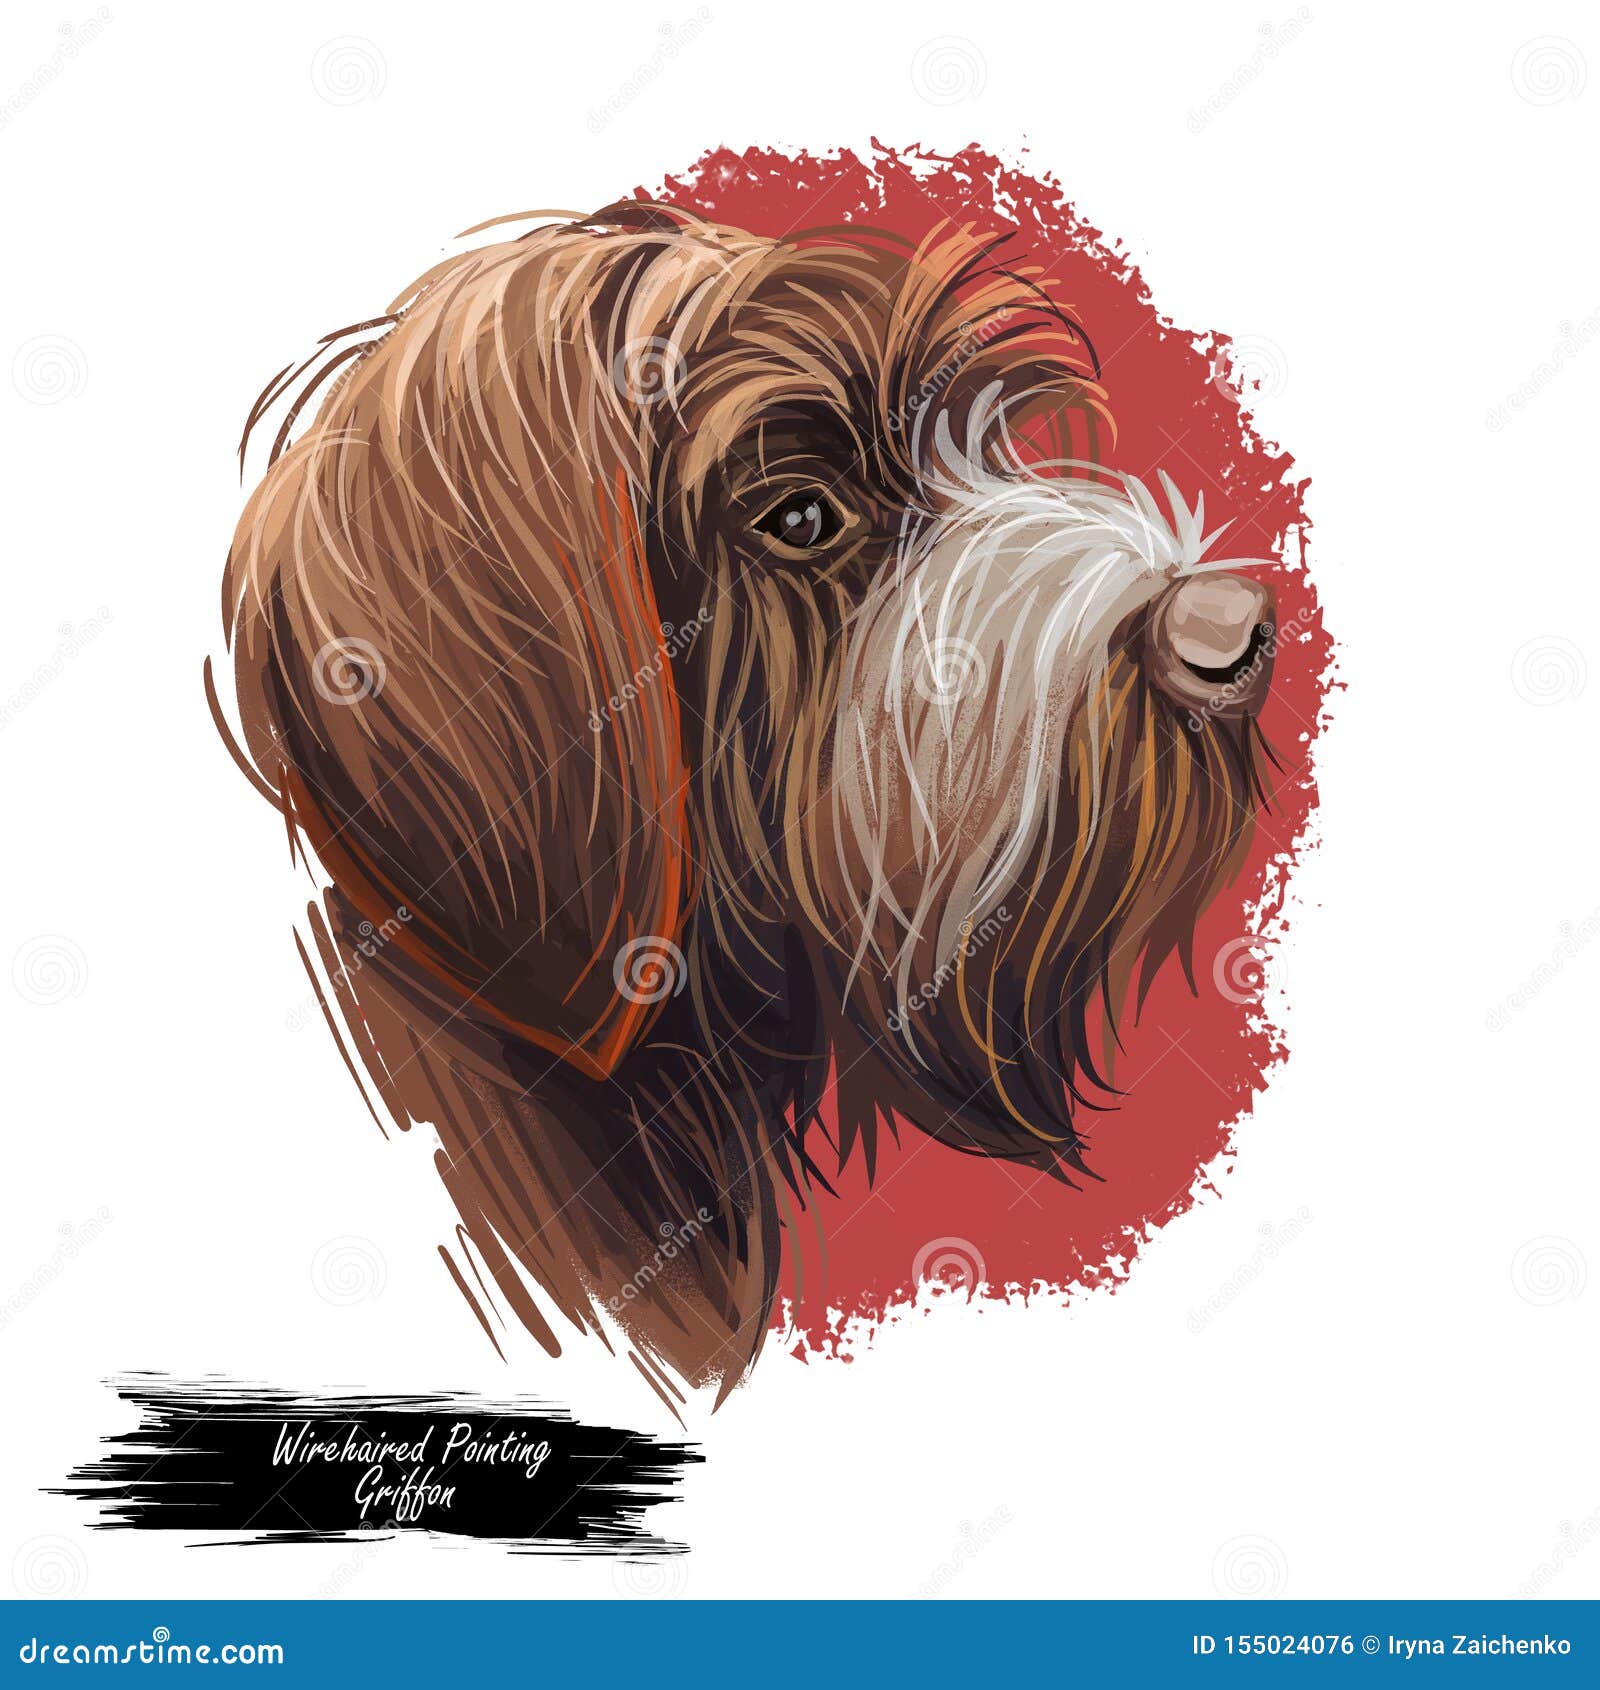 wirehaired pointing or korthals griffon dog breed portrait  on white. digital art , animal watercolor drawing